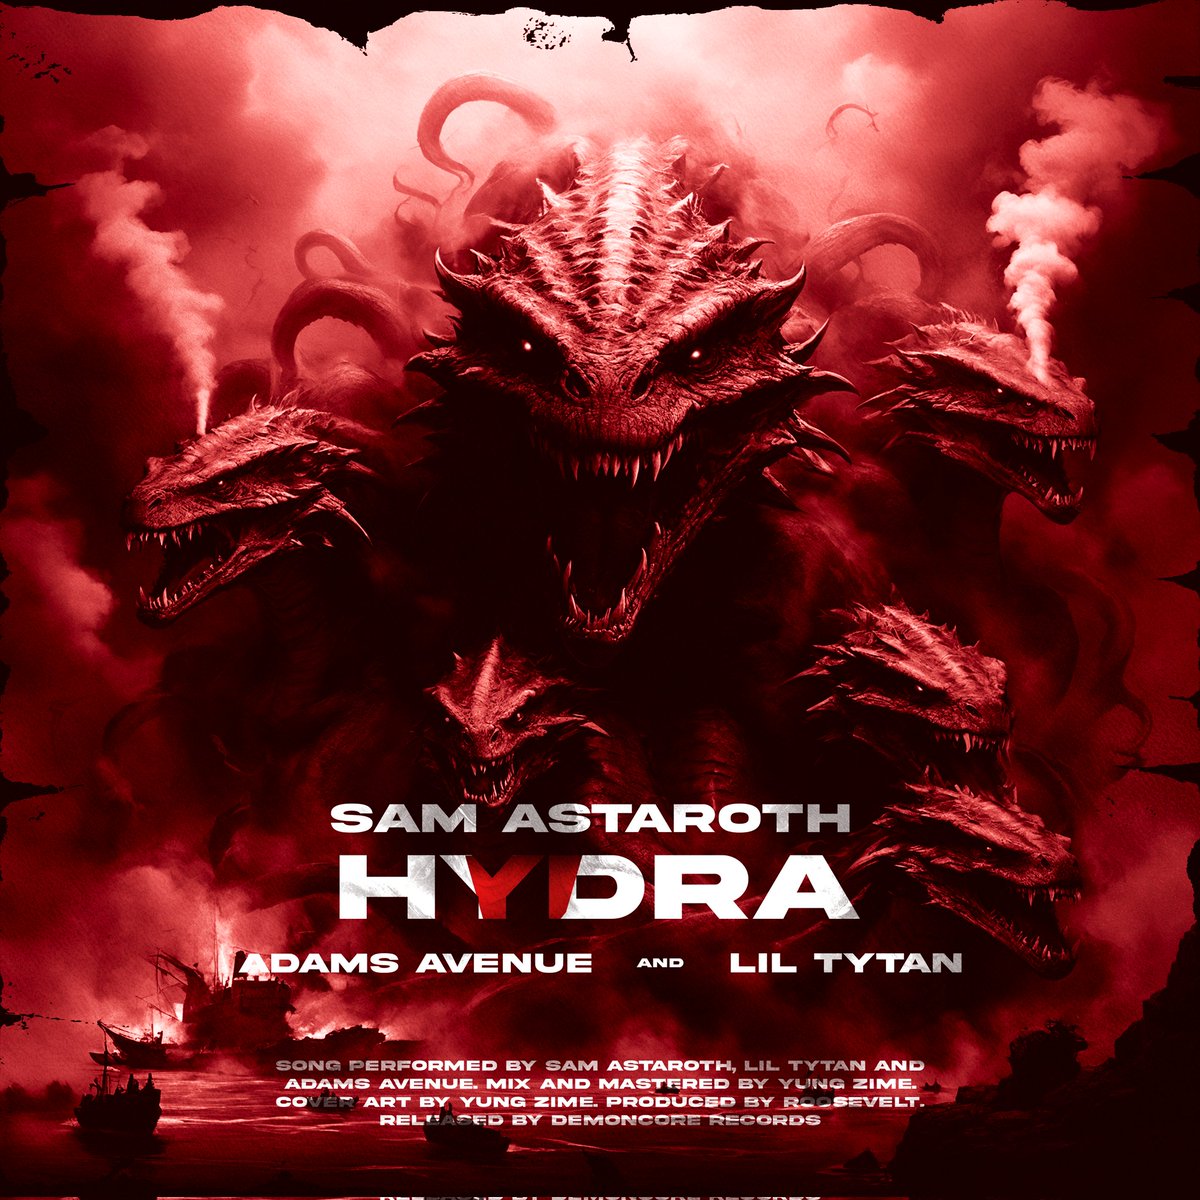 Phonk Metal banger HYDRA Out Now 👹 hypeddit.com/astaroth/hydra Collab with @liltytan & @adamsavenue777 🫱🏻‍🫲🏽 Prod: @rooseveltbeat_ Mix&Art: @yungzime Distribution: @symphonicdistro Go run this up and share the song spawns 🔥 #phonk #metal #aggressivephonk #independent